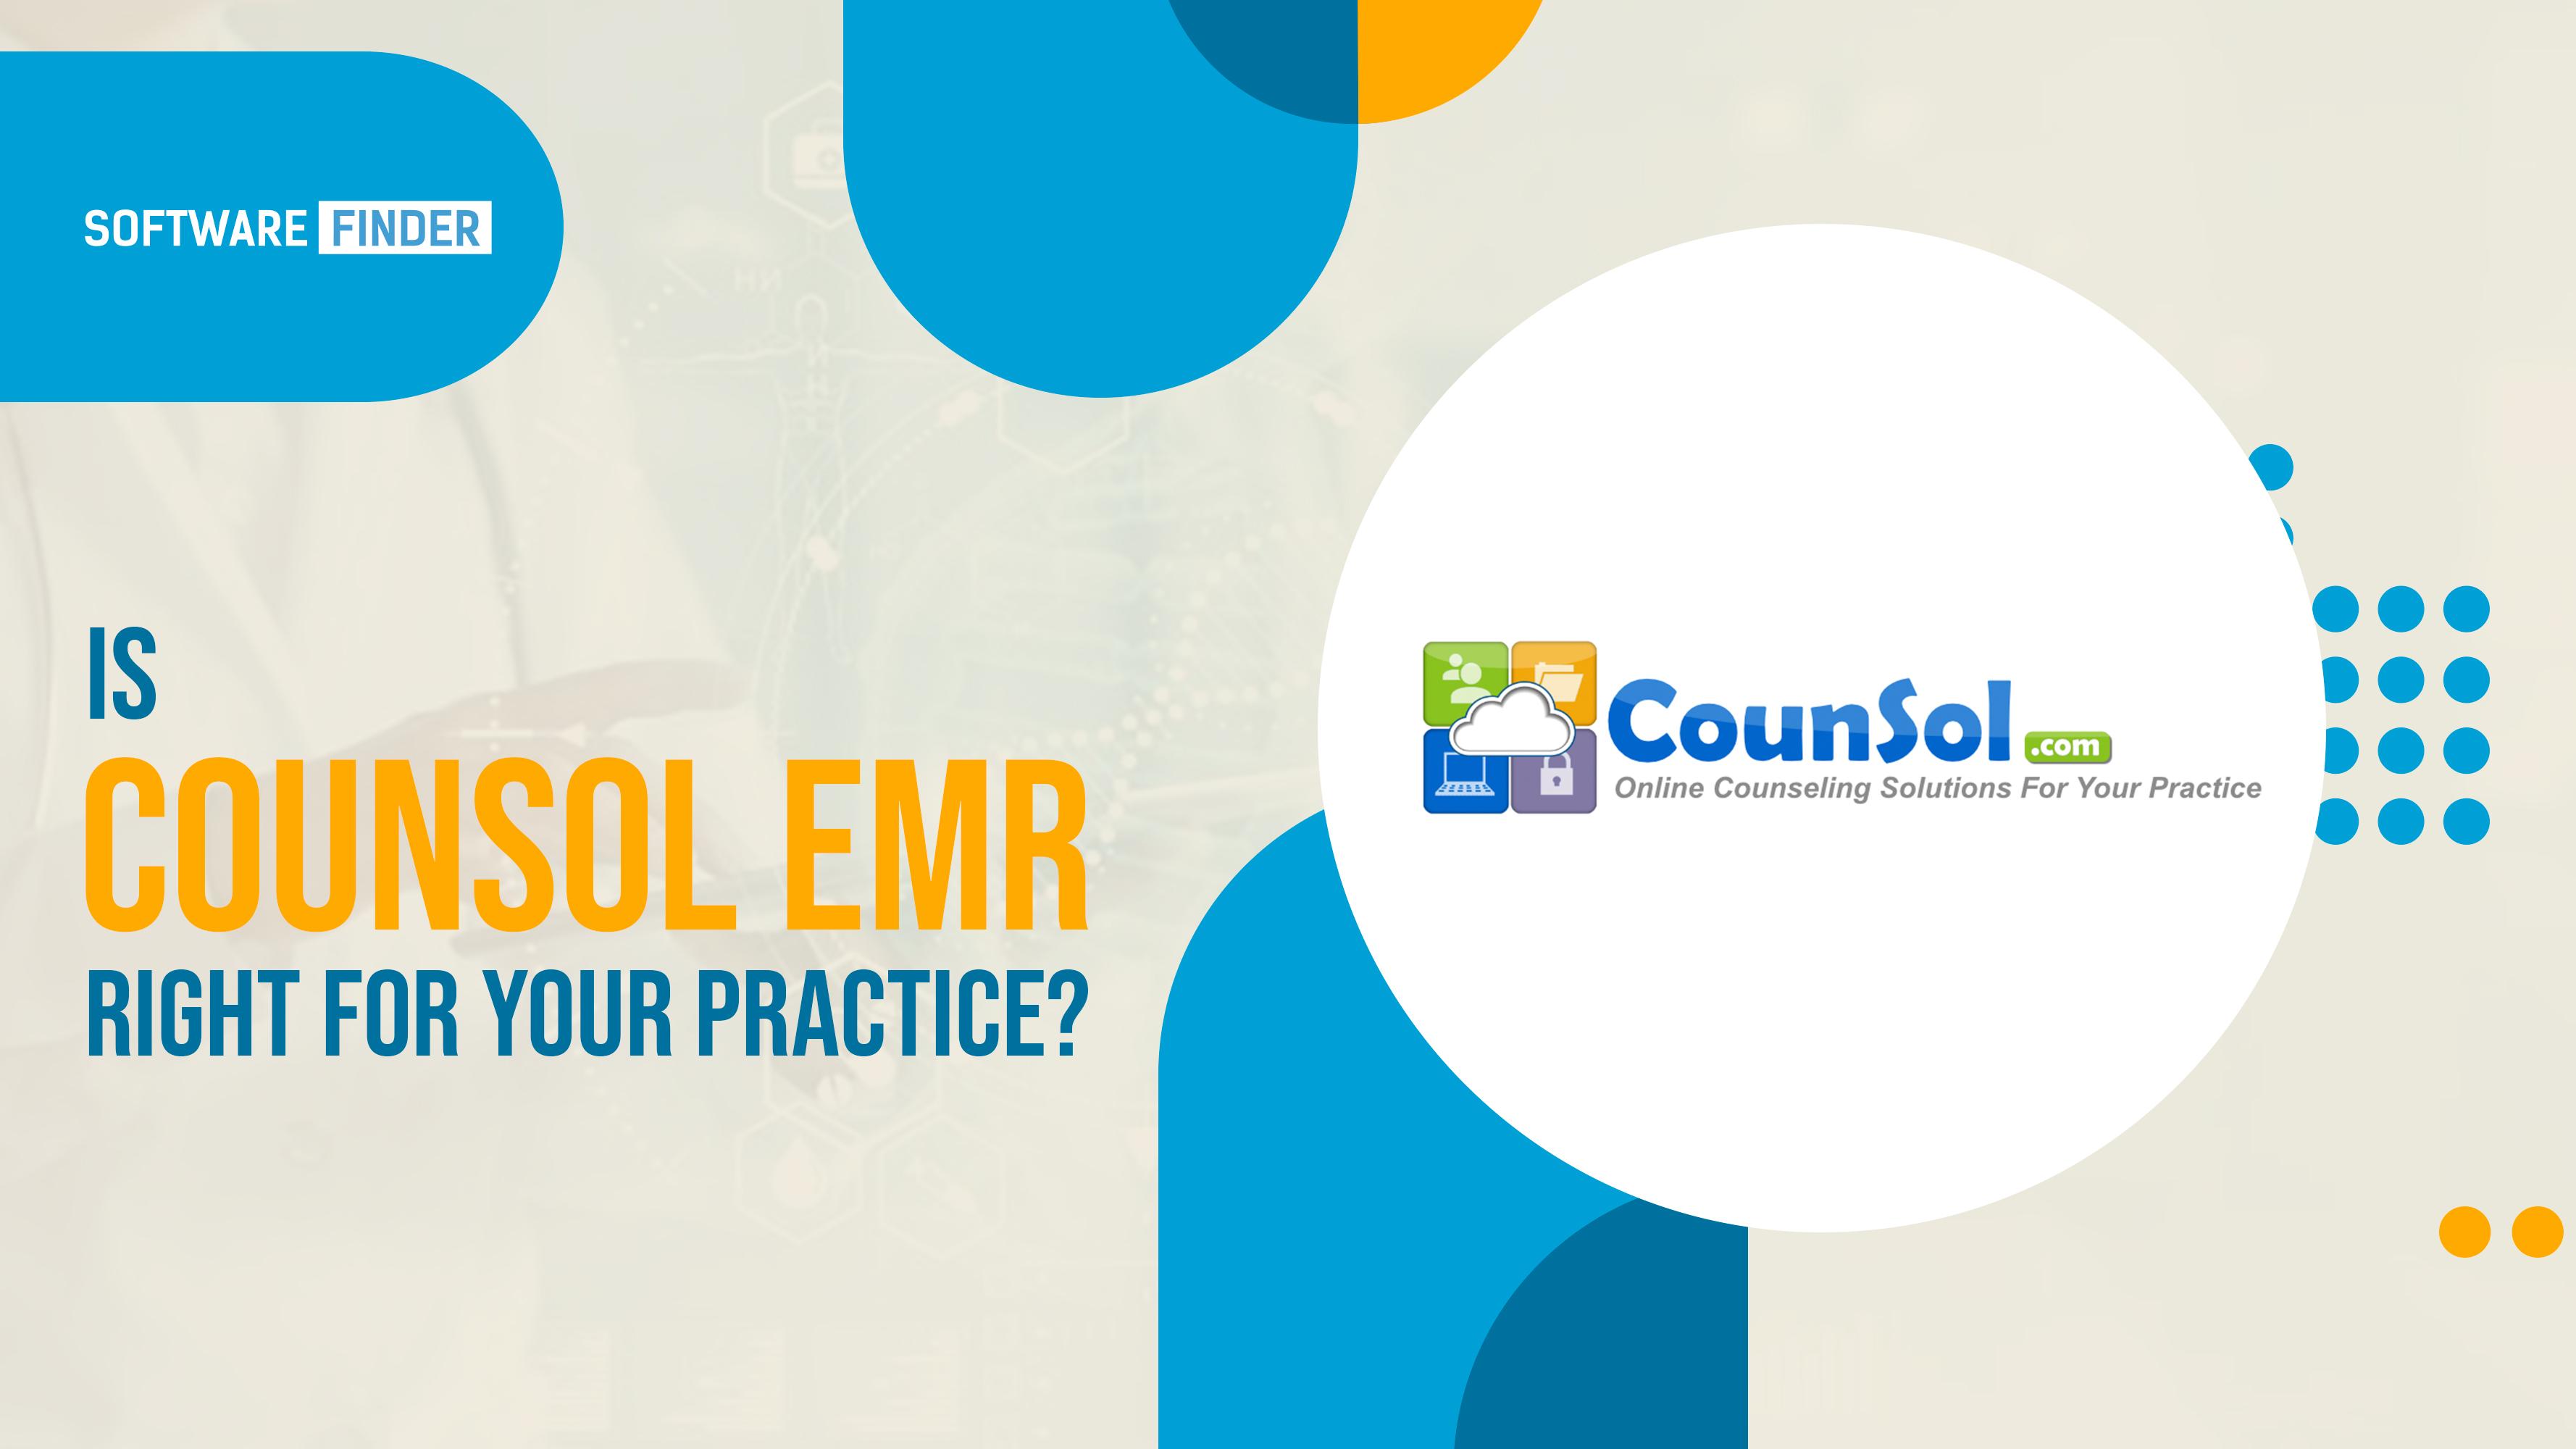 Is CounSol EMR right for your practice